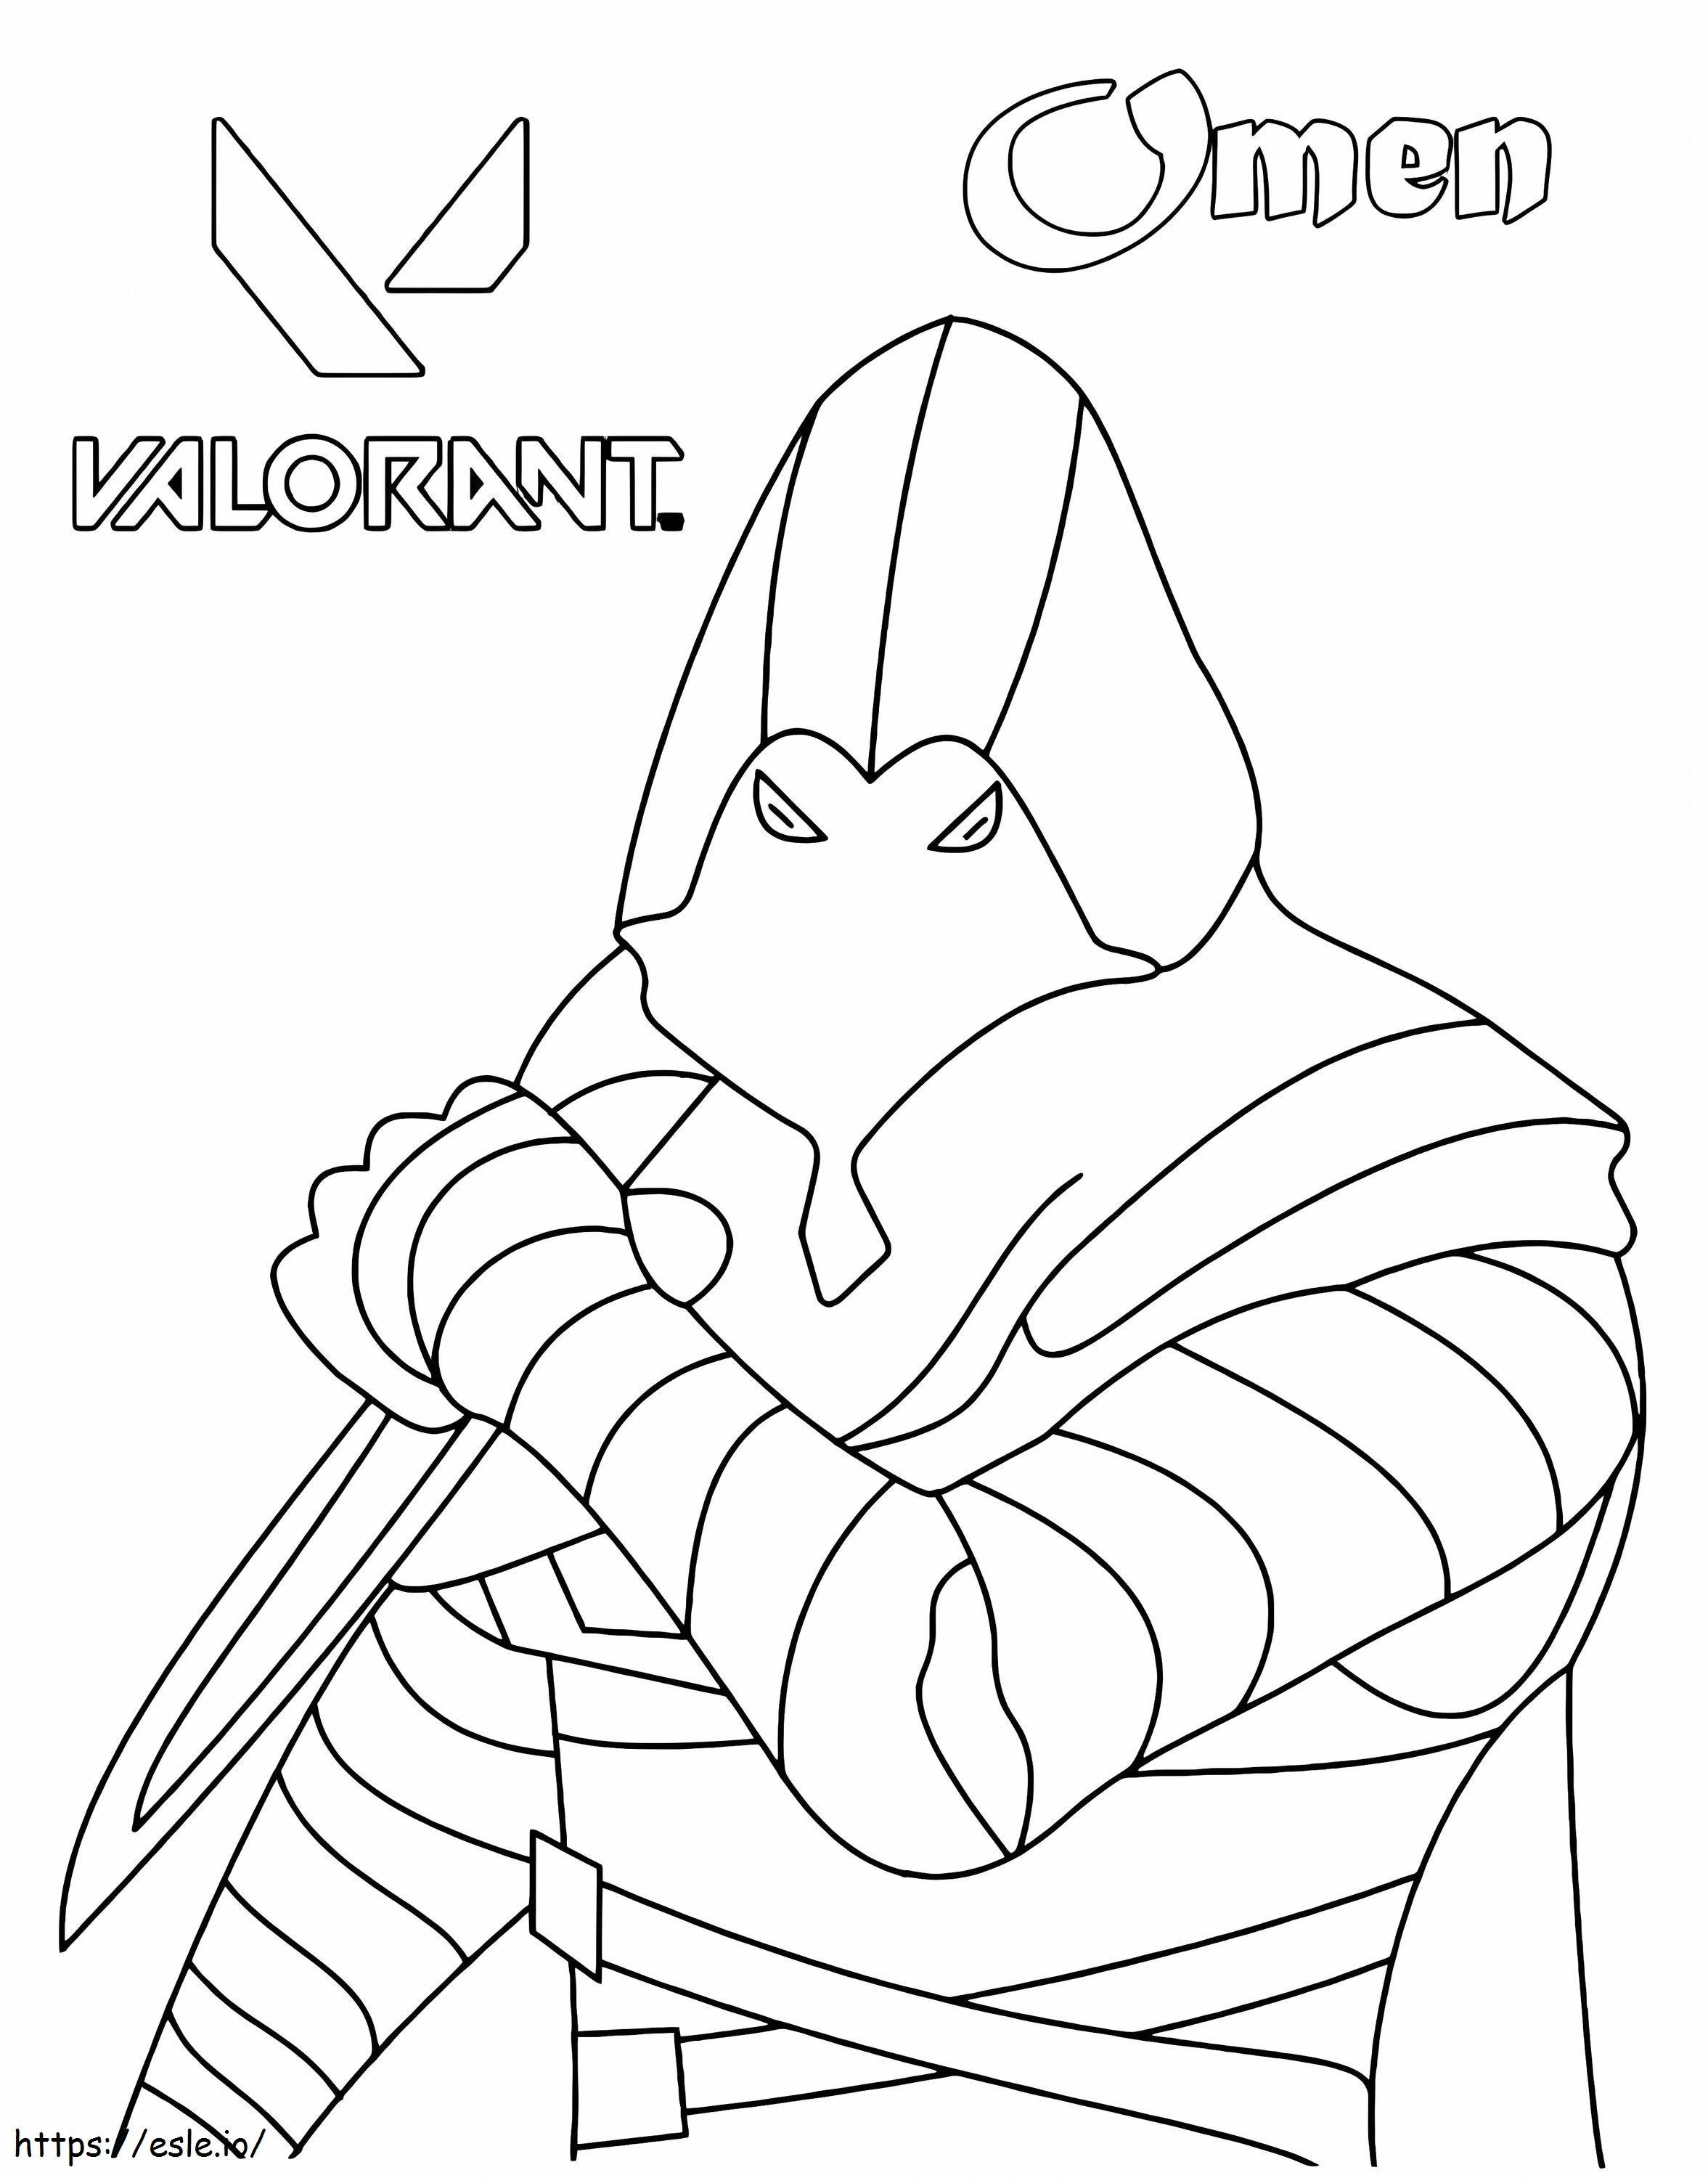 Omen From Valorant coloring page